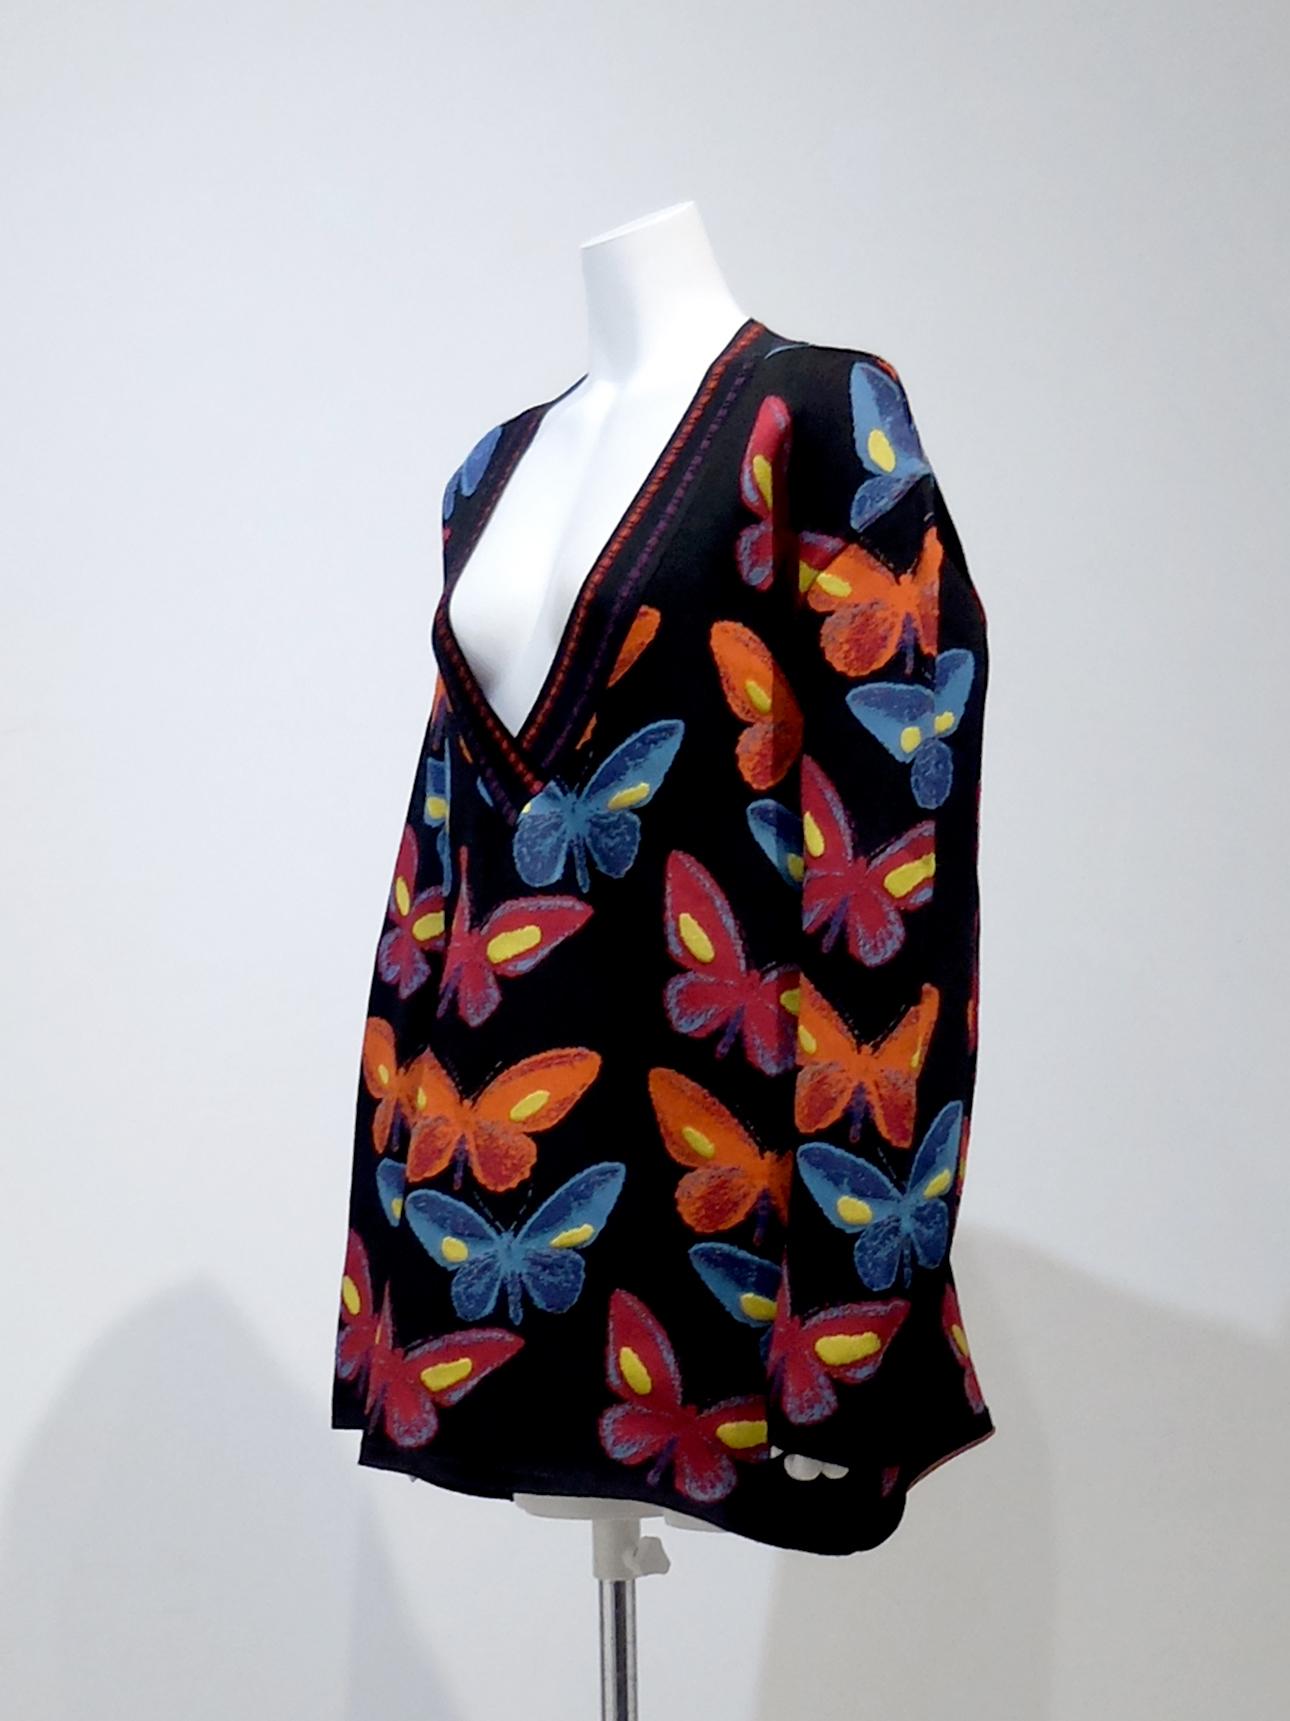 V-neck butterfly print top

Made in Italy

Fabric:
90% Viscosa, 6% Nylon, 4% Elsatam

Size/Measurements (approximate)
Size S
Bust 117cm (armpit to armpit)
Sleeve 60cm 
Length 77.5cm (centre back to hem)